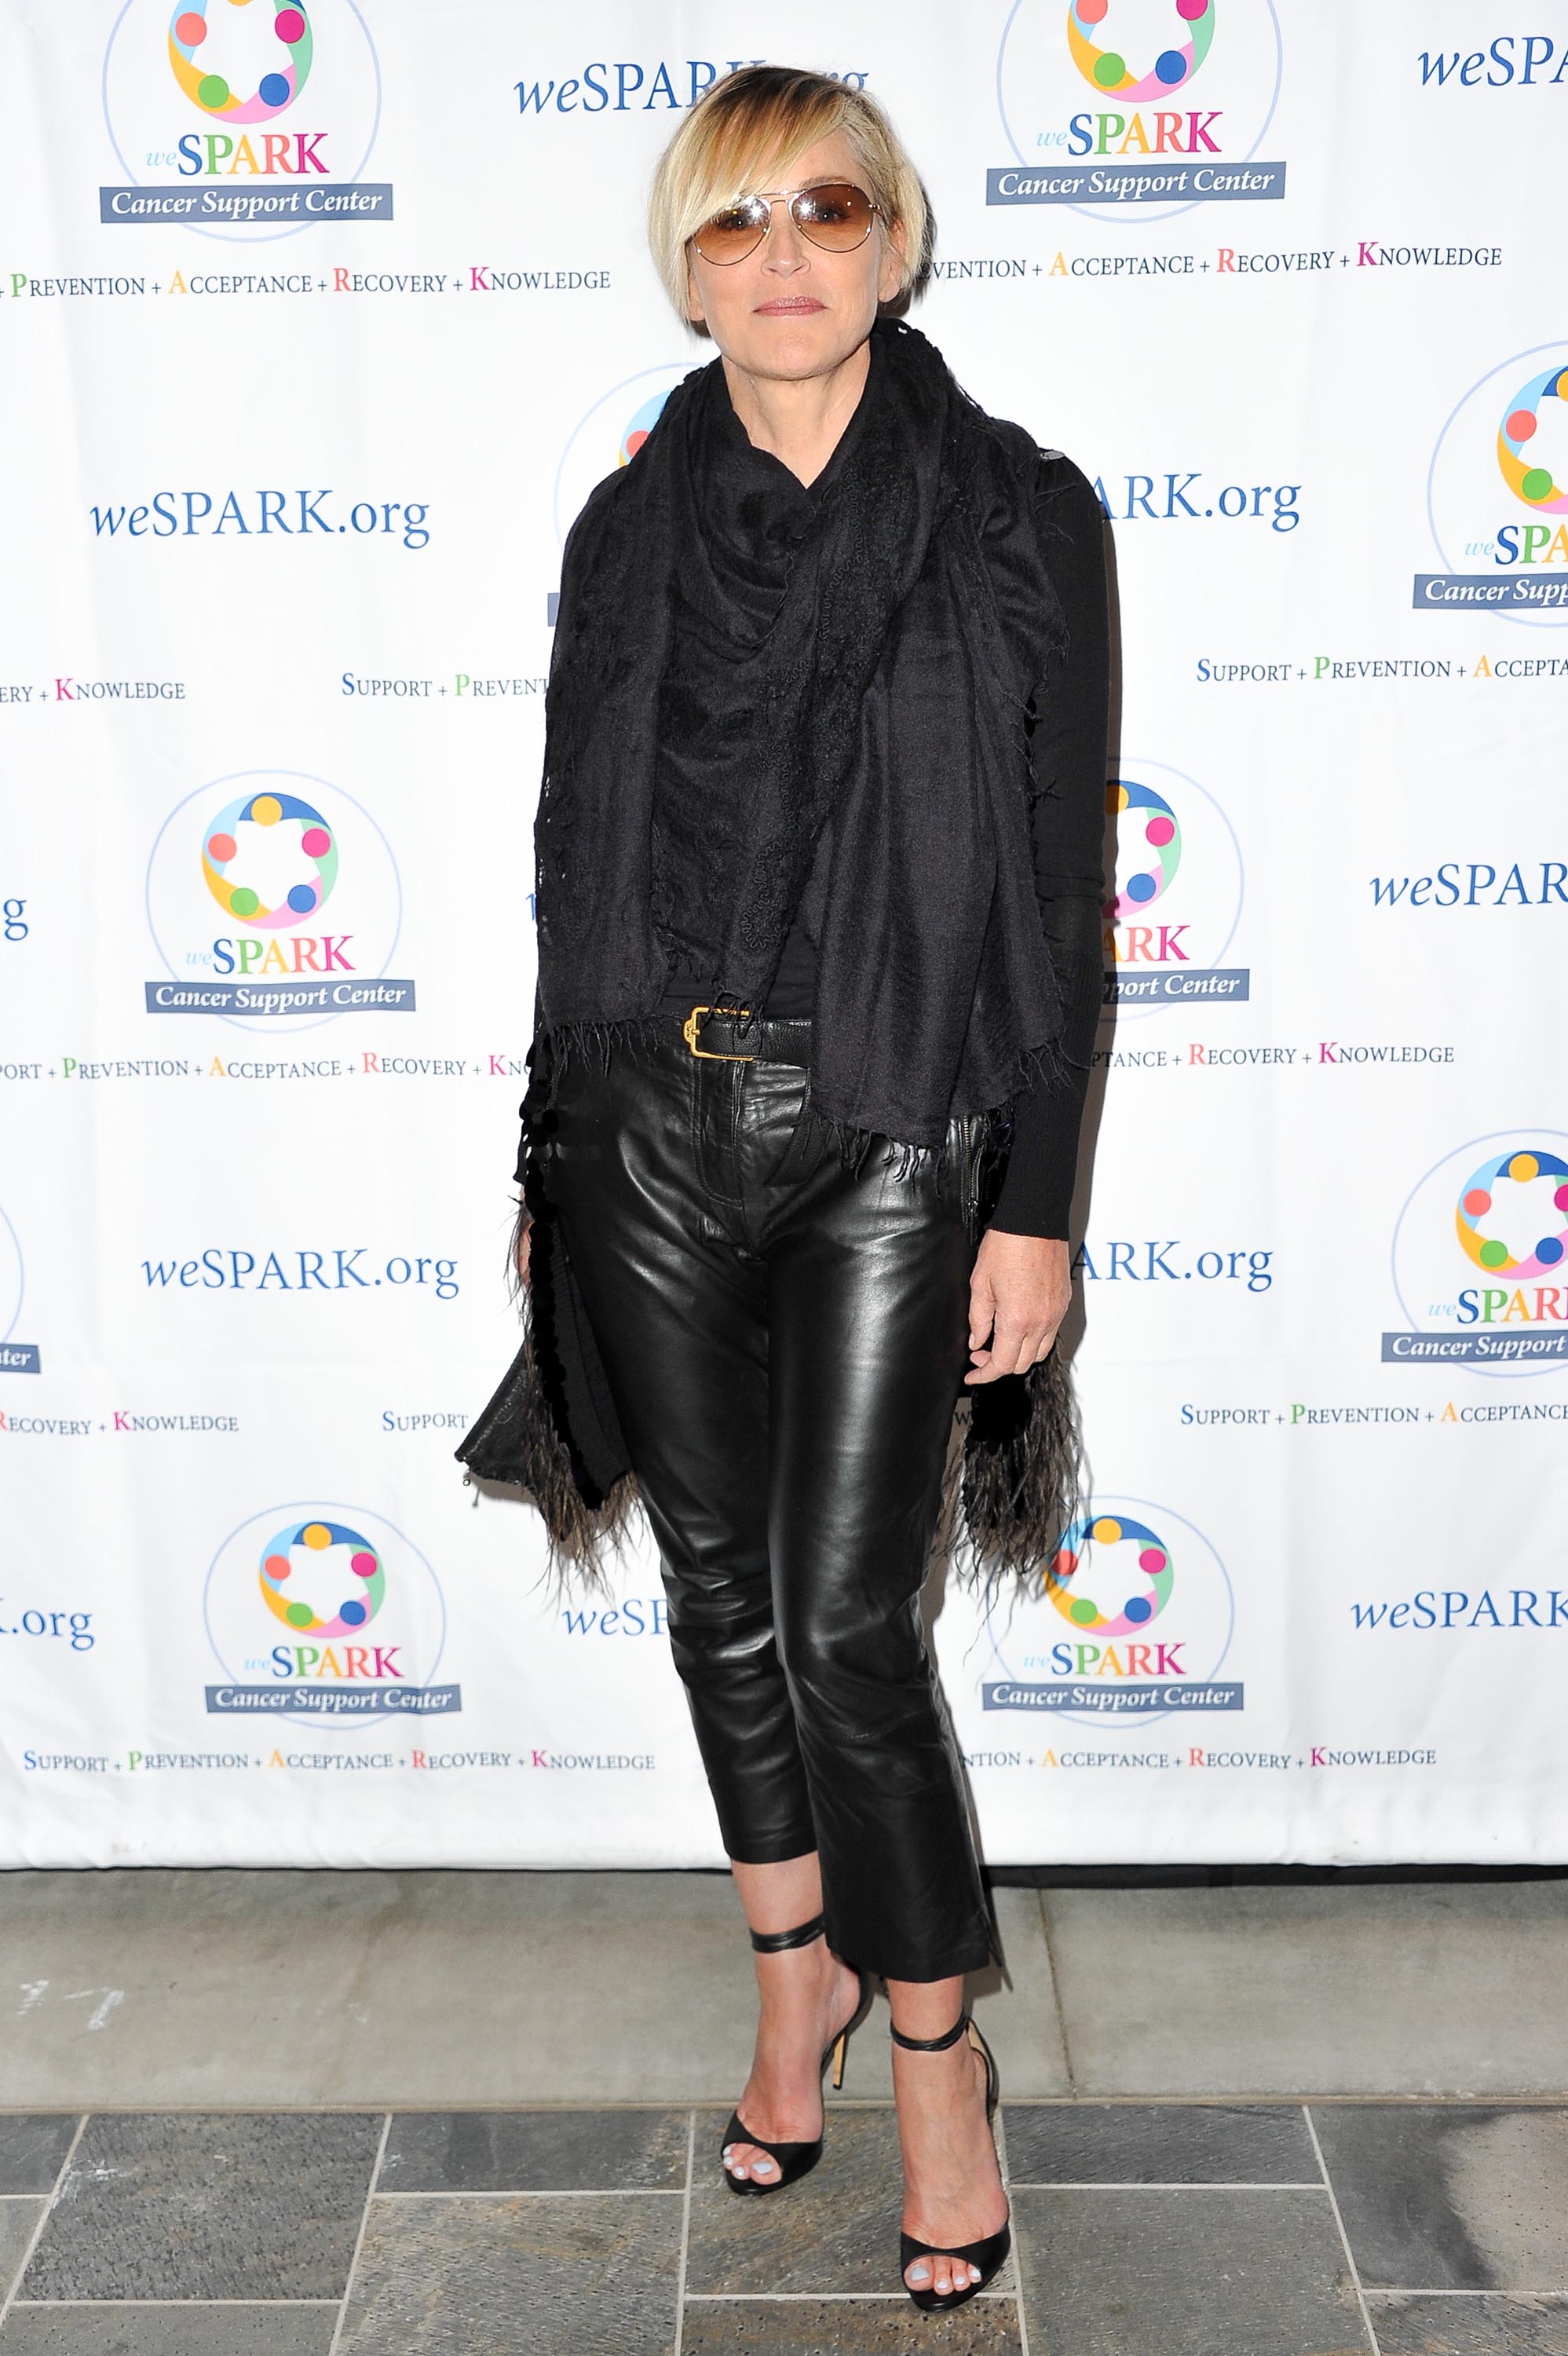 Sharon Stone attends the weSPARK Comedy Night